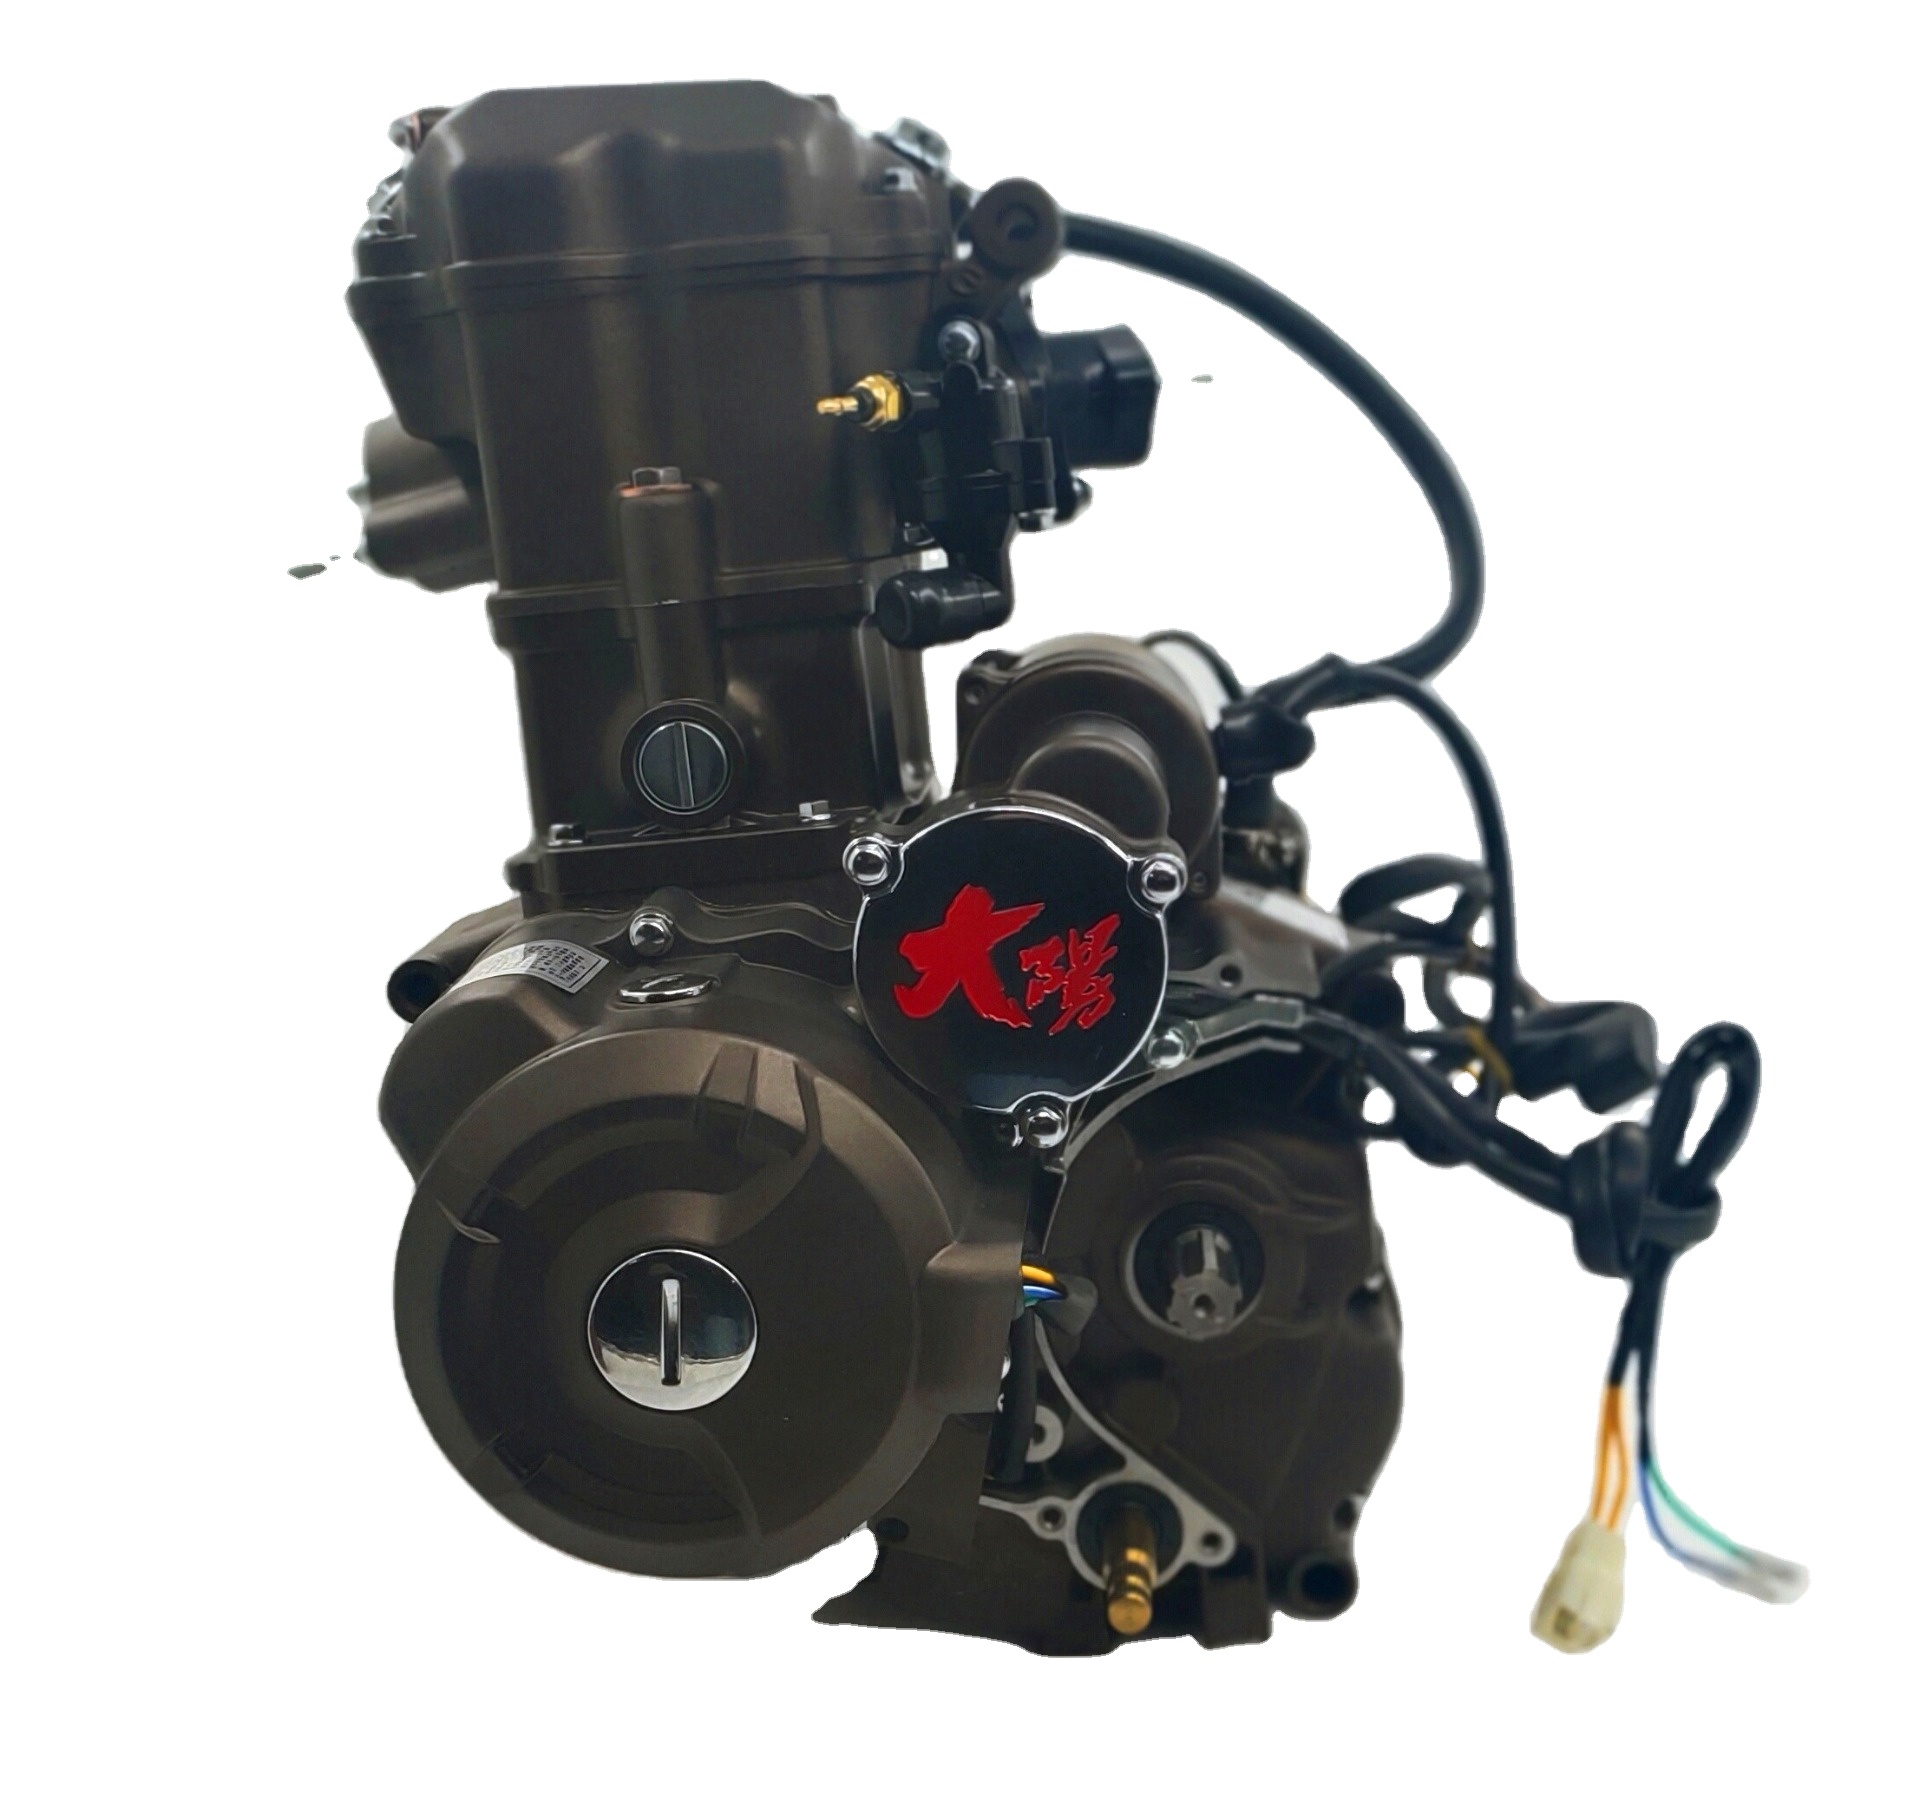 CG150 New Water-cooled DAYANG LIFAN Motorcycle Engine Assembly Single Cylinder Four Stroke Style China CCC Origin Type